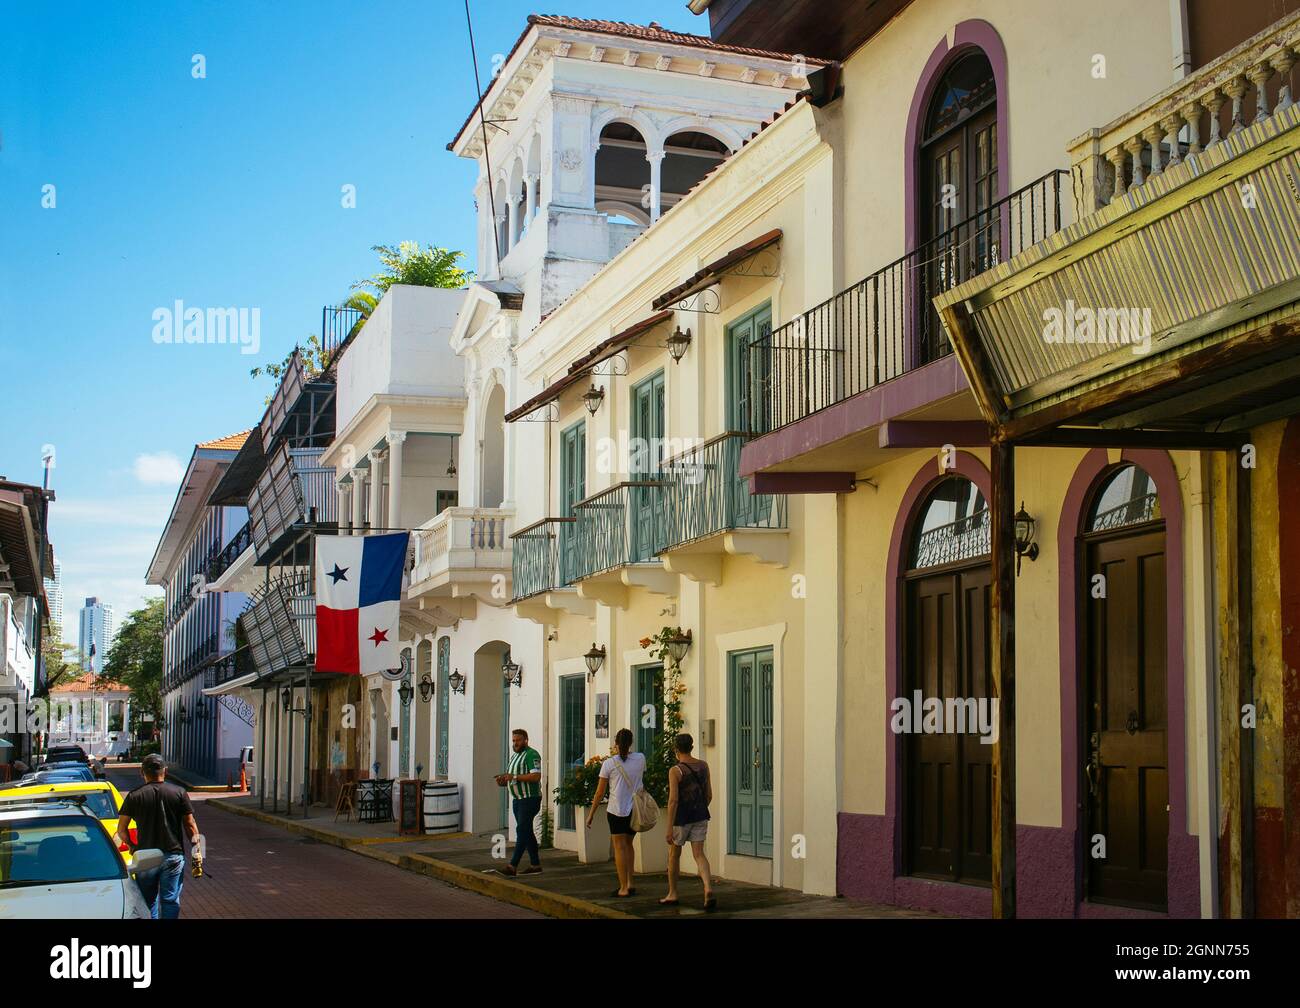 Old town, Panama City. Panama. September 16, 2021. Heritage buildings in the Old Town of Panama City. Heritage architecture of the Caribbean country r Stock Photo